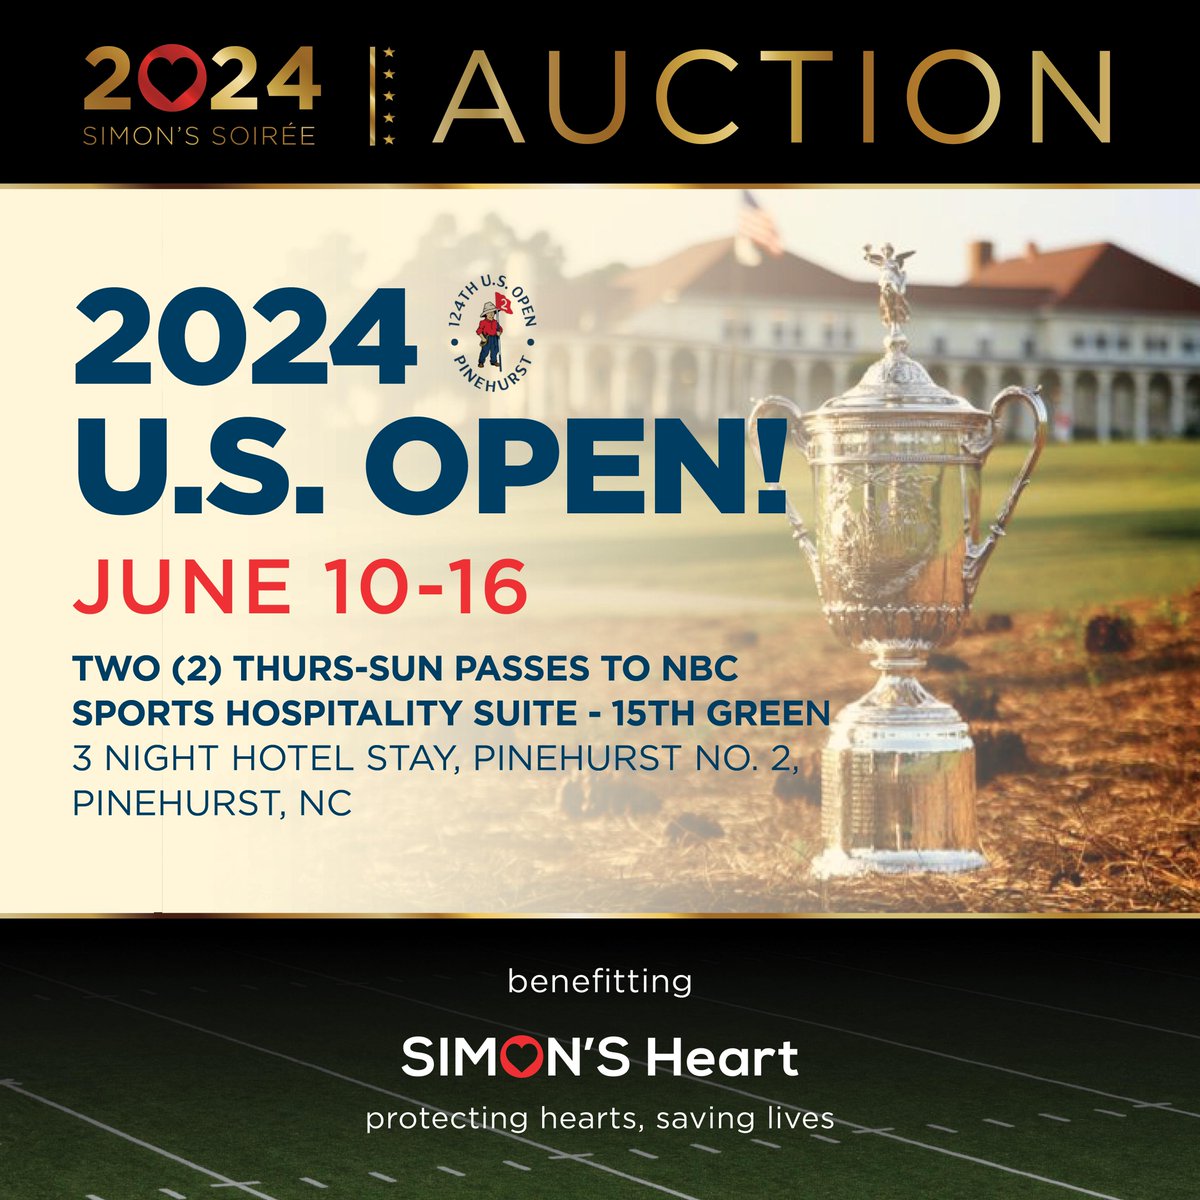 Where are our golf fans at?! Don't miss out on your chance to win two (2) passes to the NBC Sports Hospitality Suite (Thursday through Sunday) at the 2024 U.S. Open, plus a 3-night hotel stay. You don't have to be present to bid! Bid online now: bit.ly/42A30YN